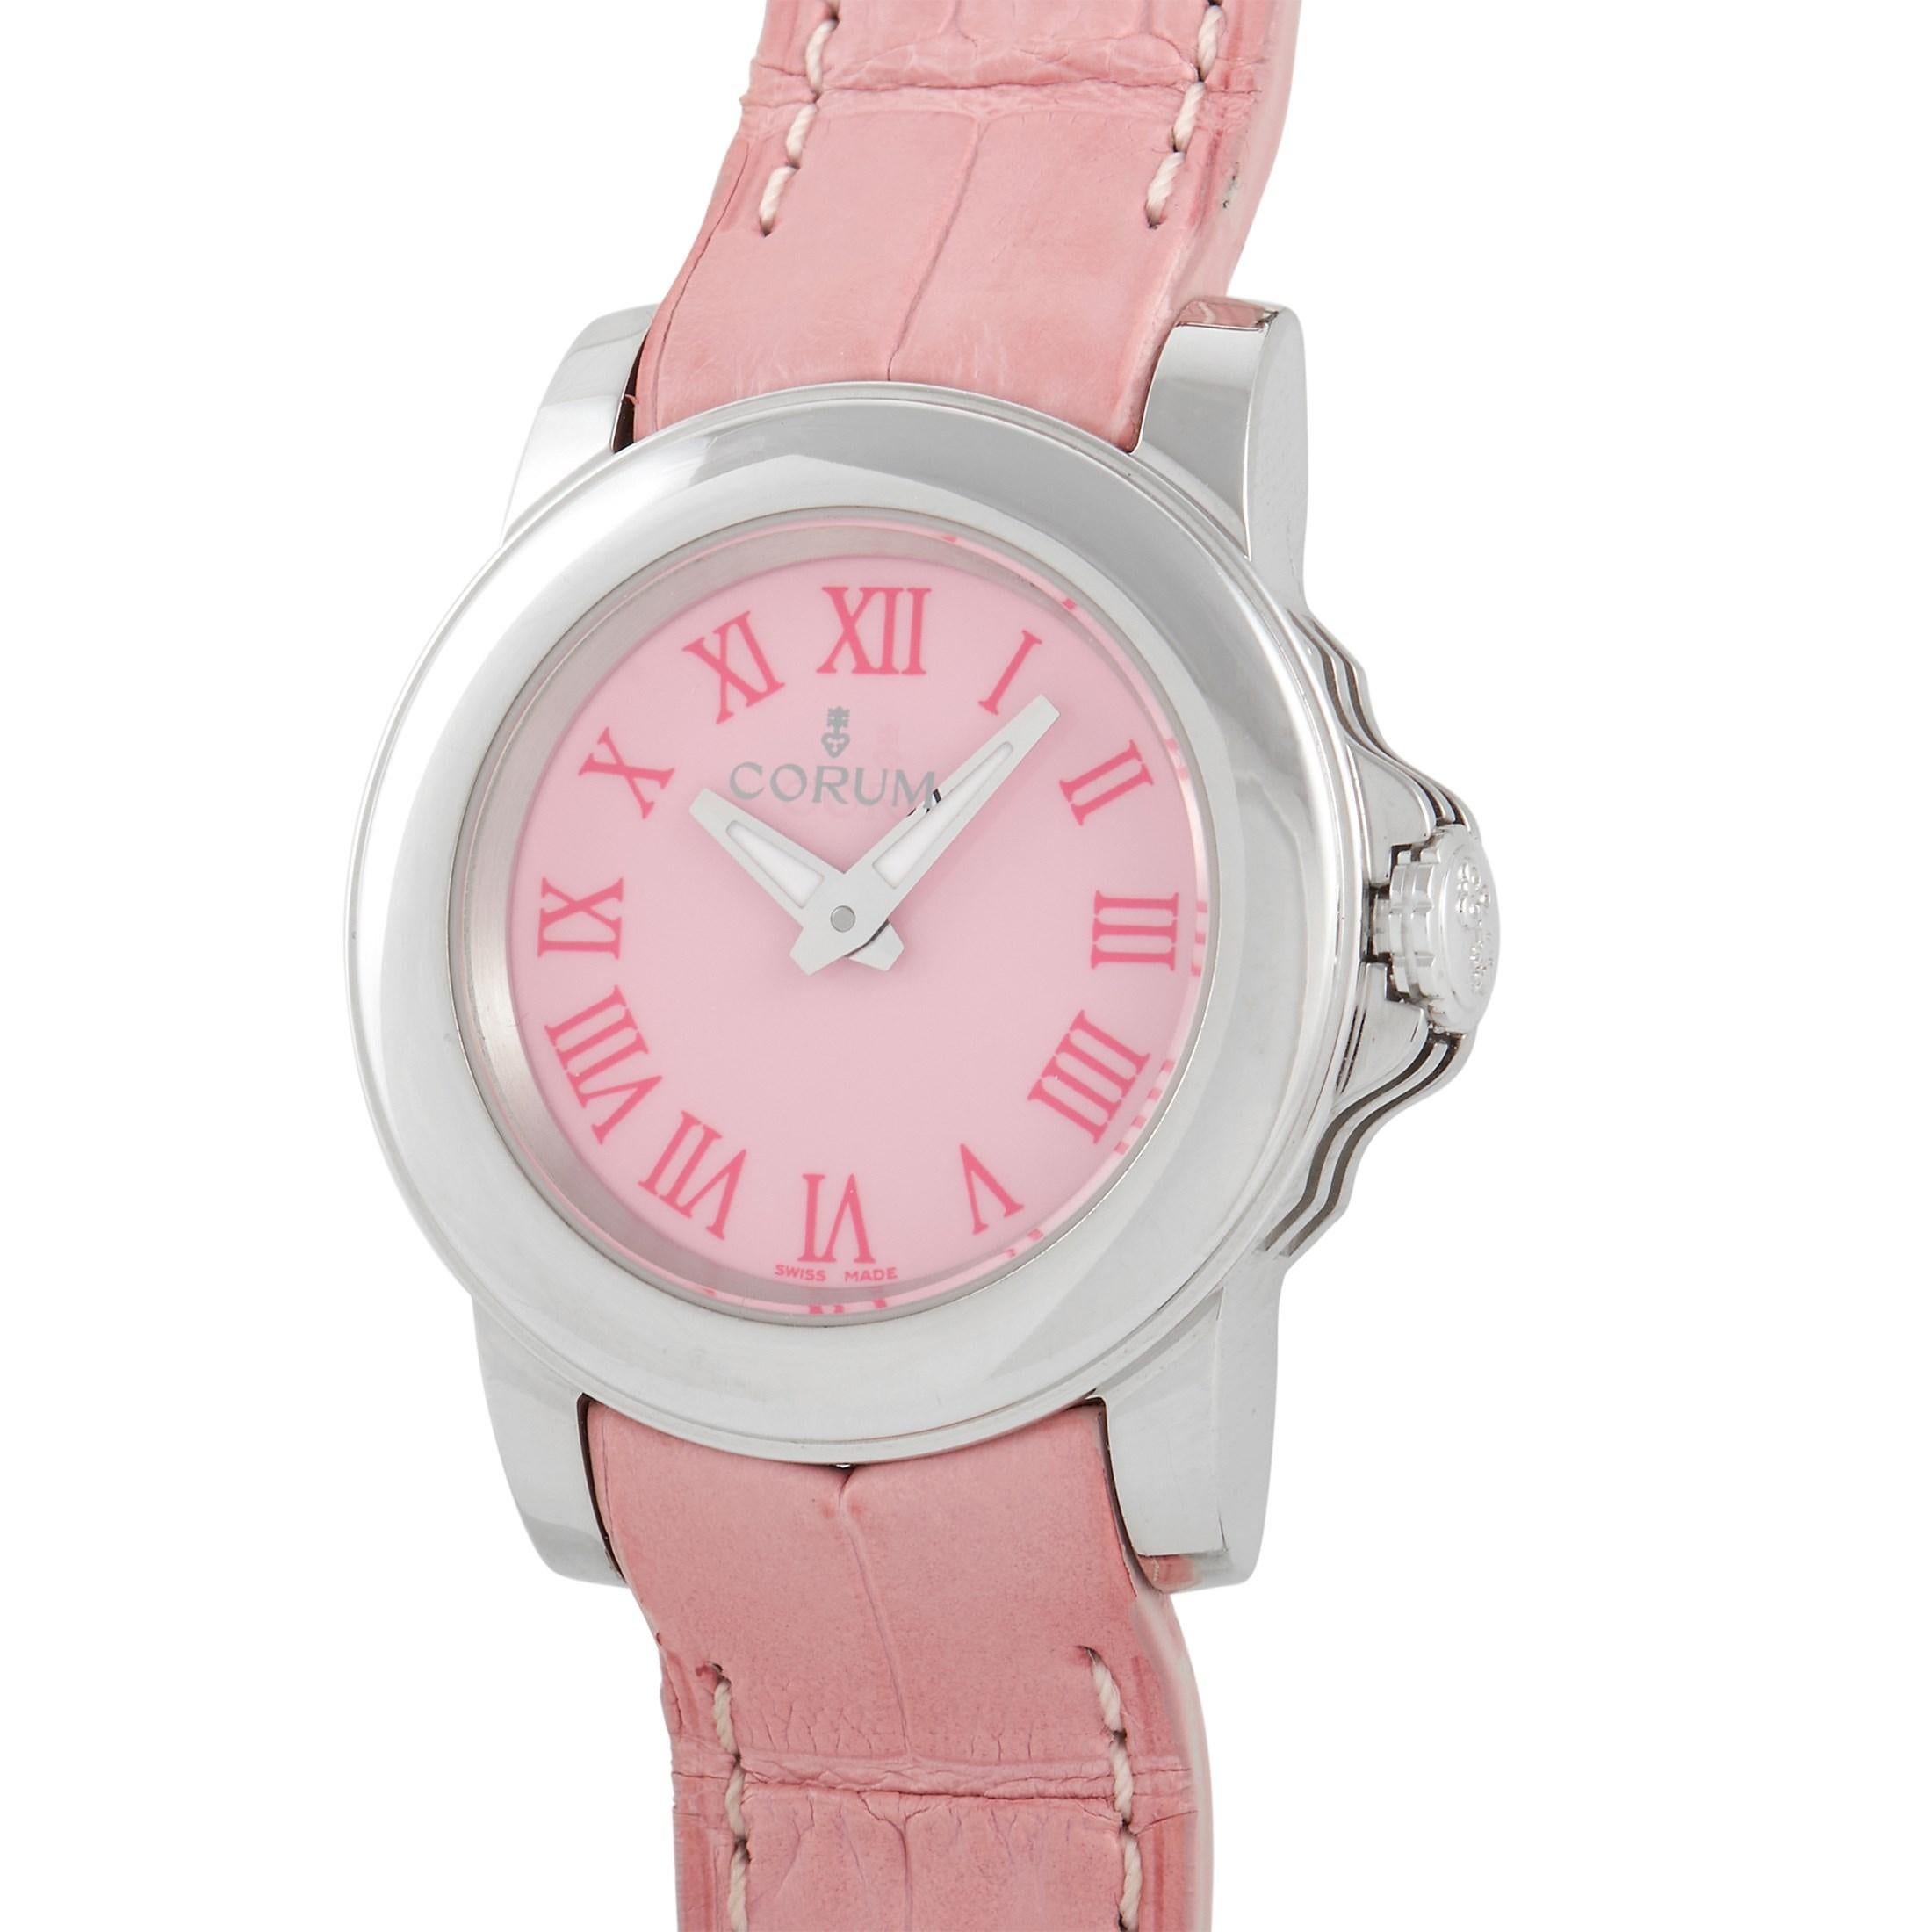 The Corum Pink Ladies Watch possesses an undeniable sense of charm. 

This Swiss-made watch features a round case crafted from 18K white gold. On the pink dial, you’ll find Roman numeral hour markers and luminous silver-toned hands. It’s attached to